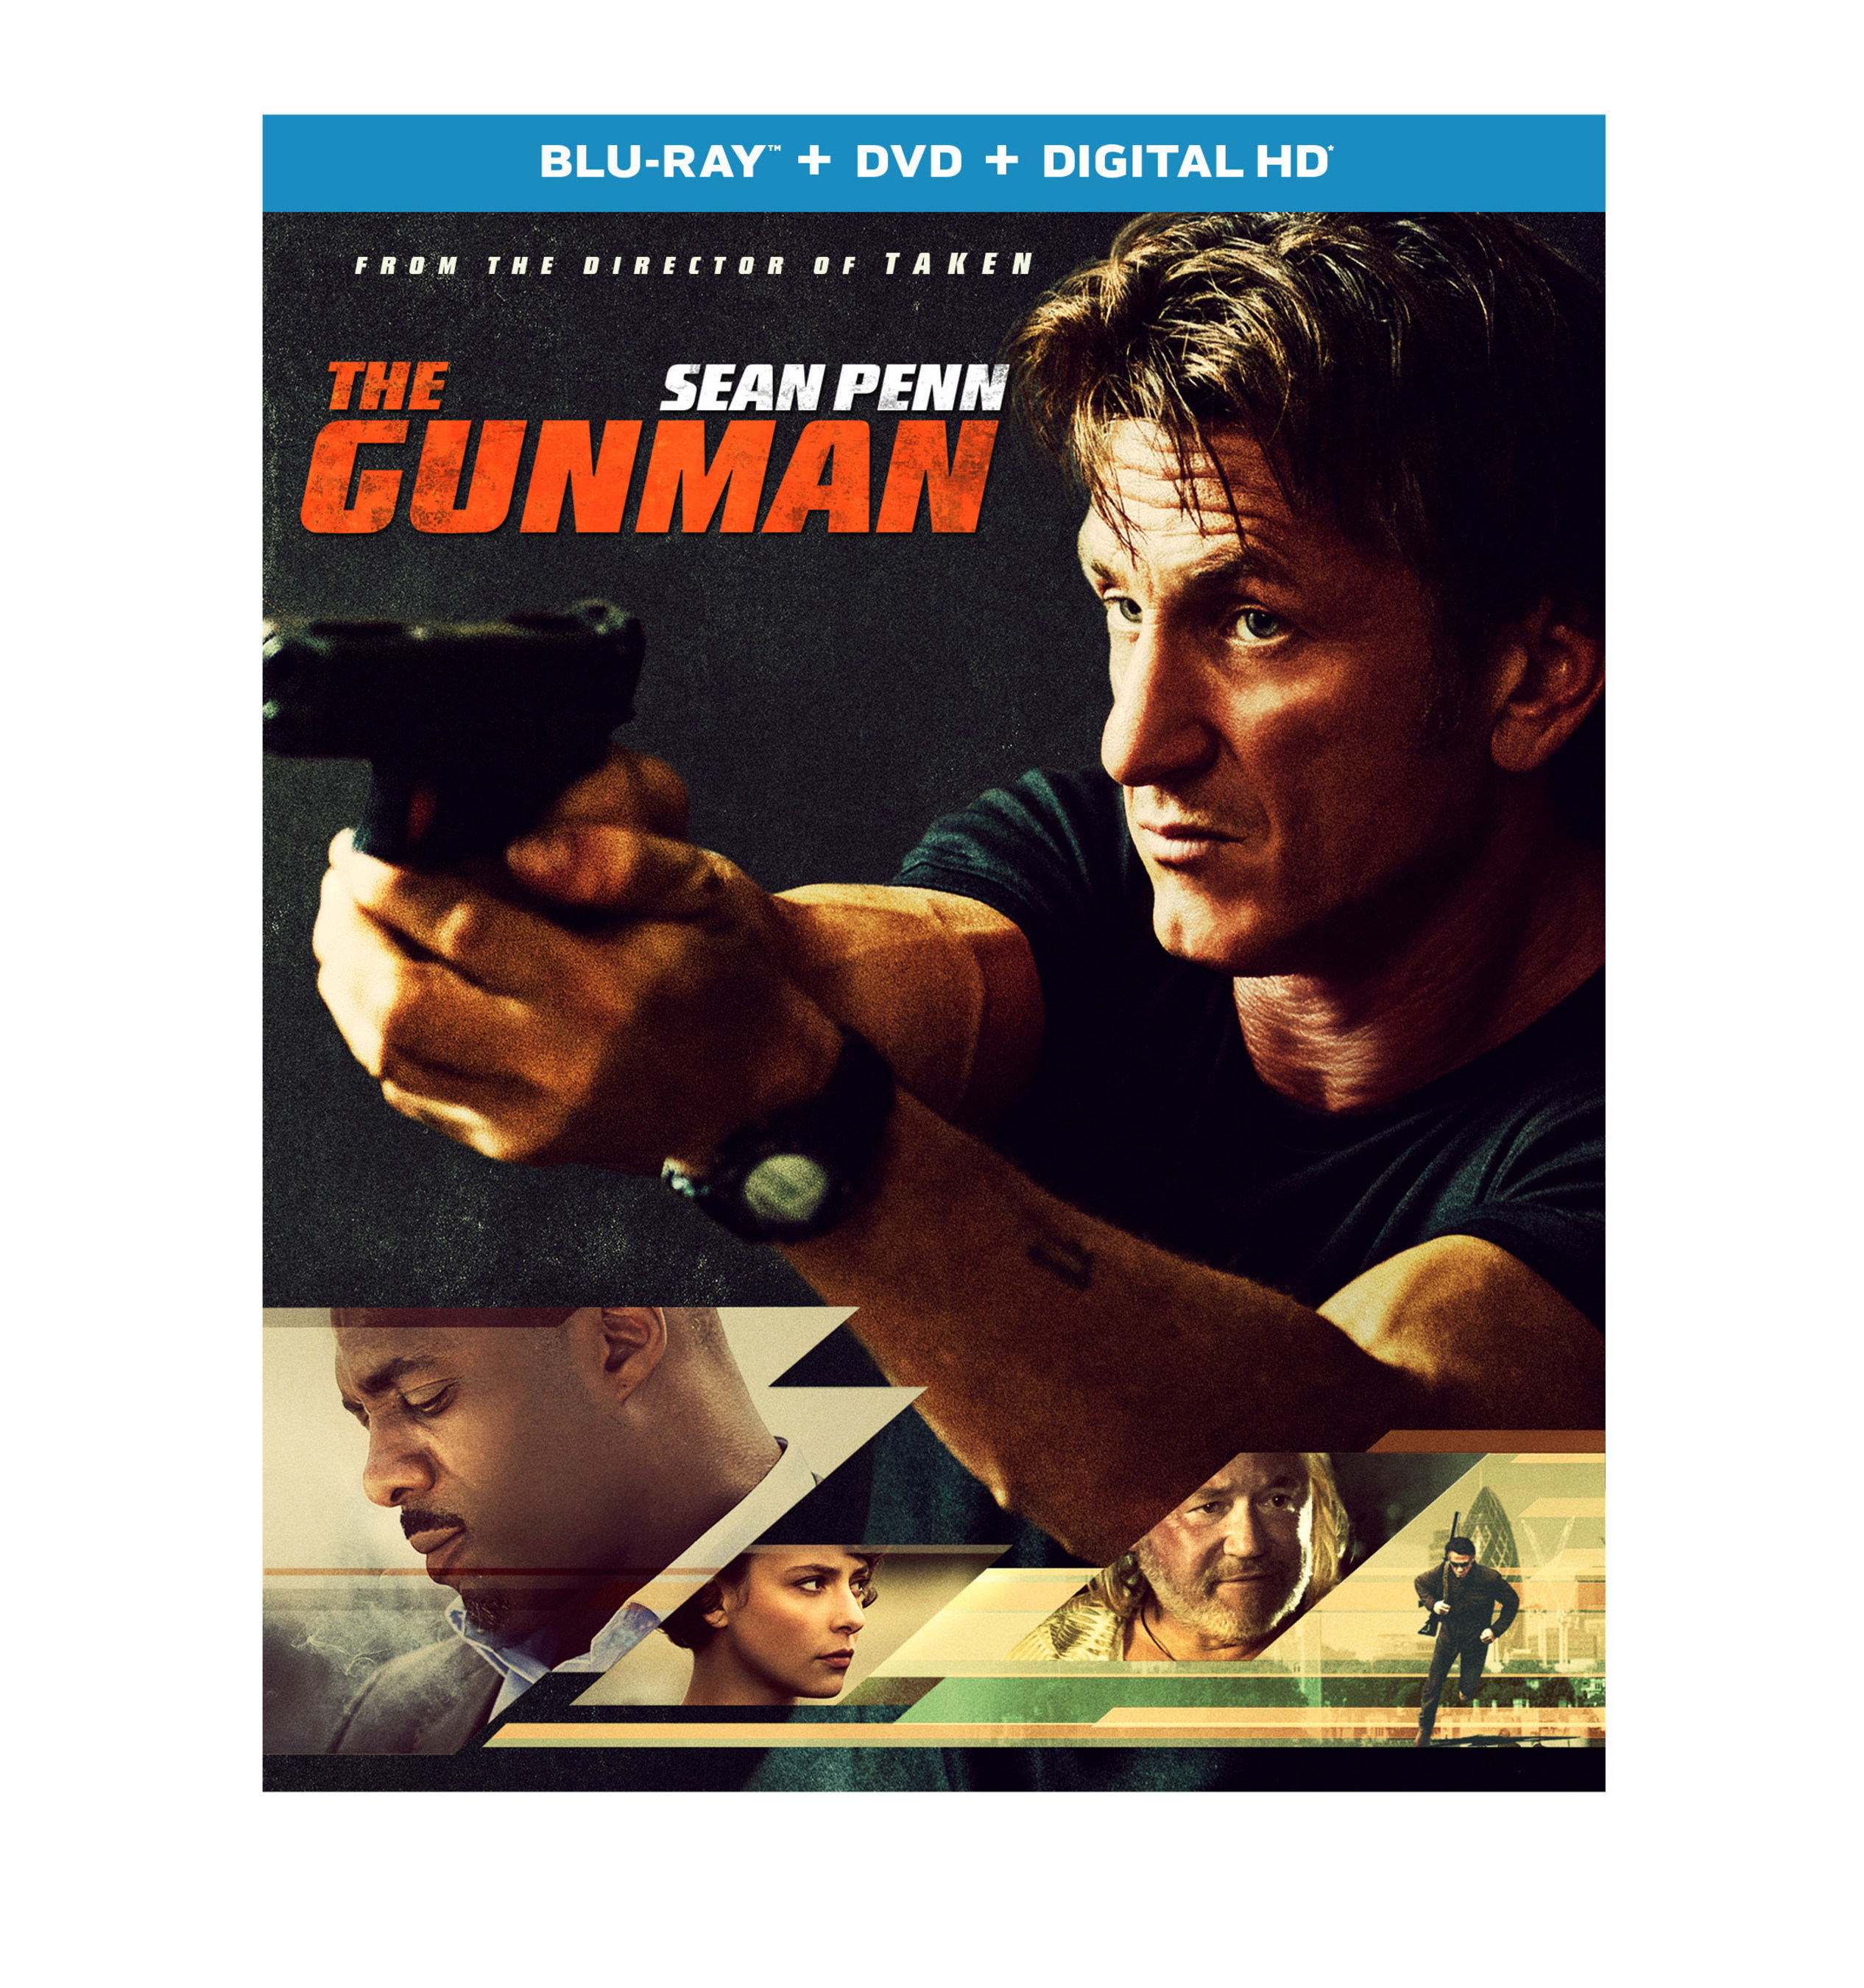 THE GUNMAN IS AVAILABLE ON DIGITAL HD JUNE 16TH AND ON BLU-RAY & DVD JUNE 30TH FROM UNIVERSAL PICTURES HOME ENTERTAINMENT.